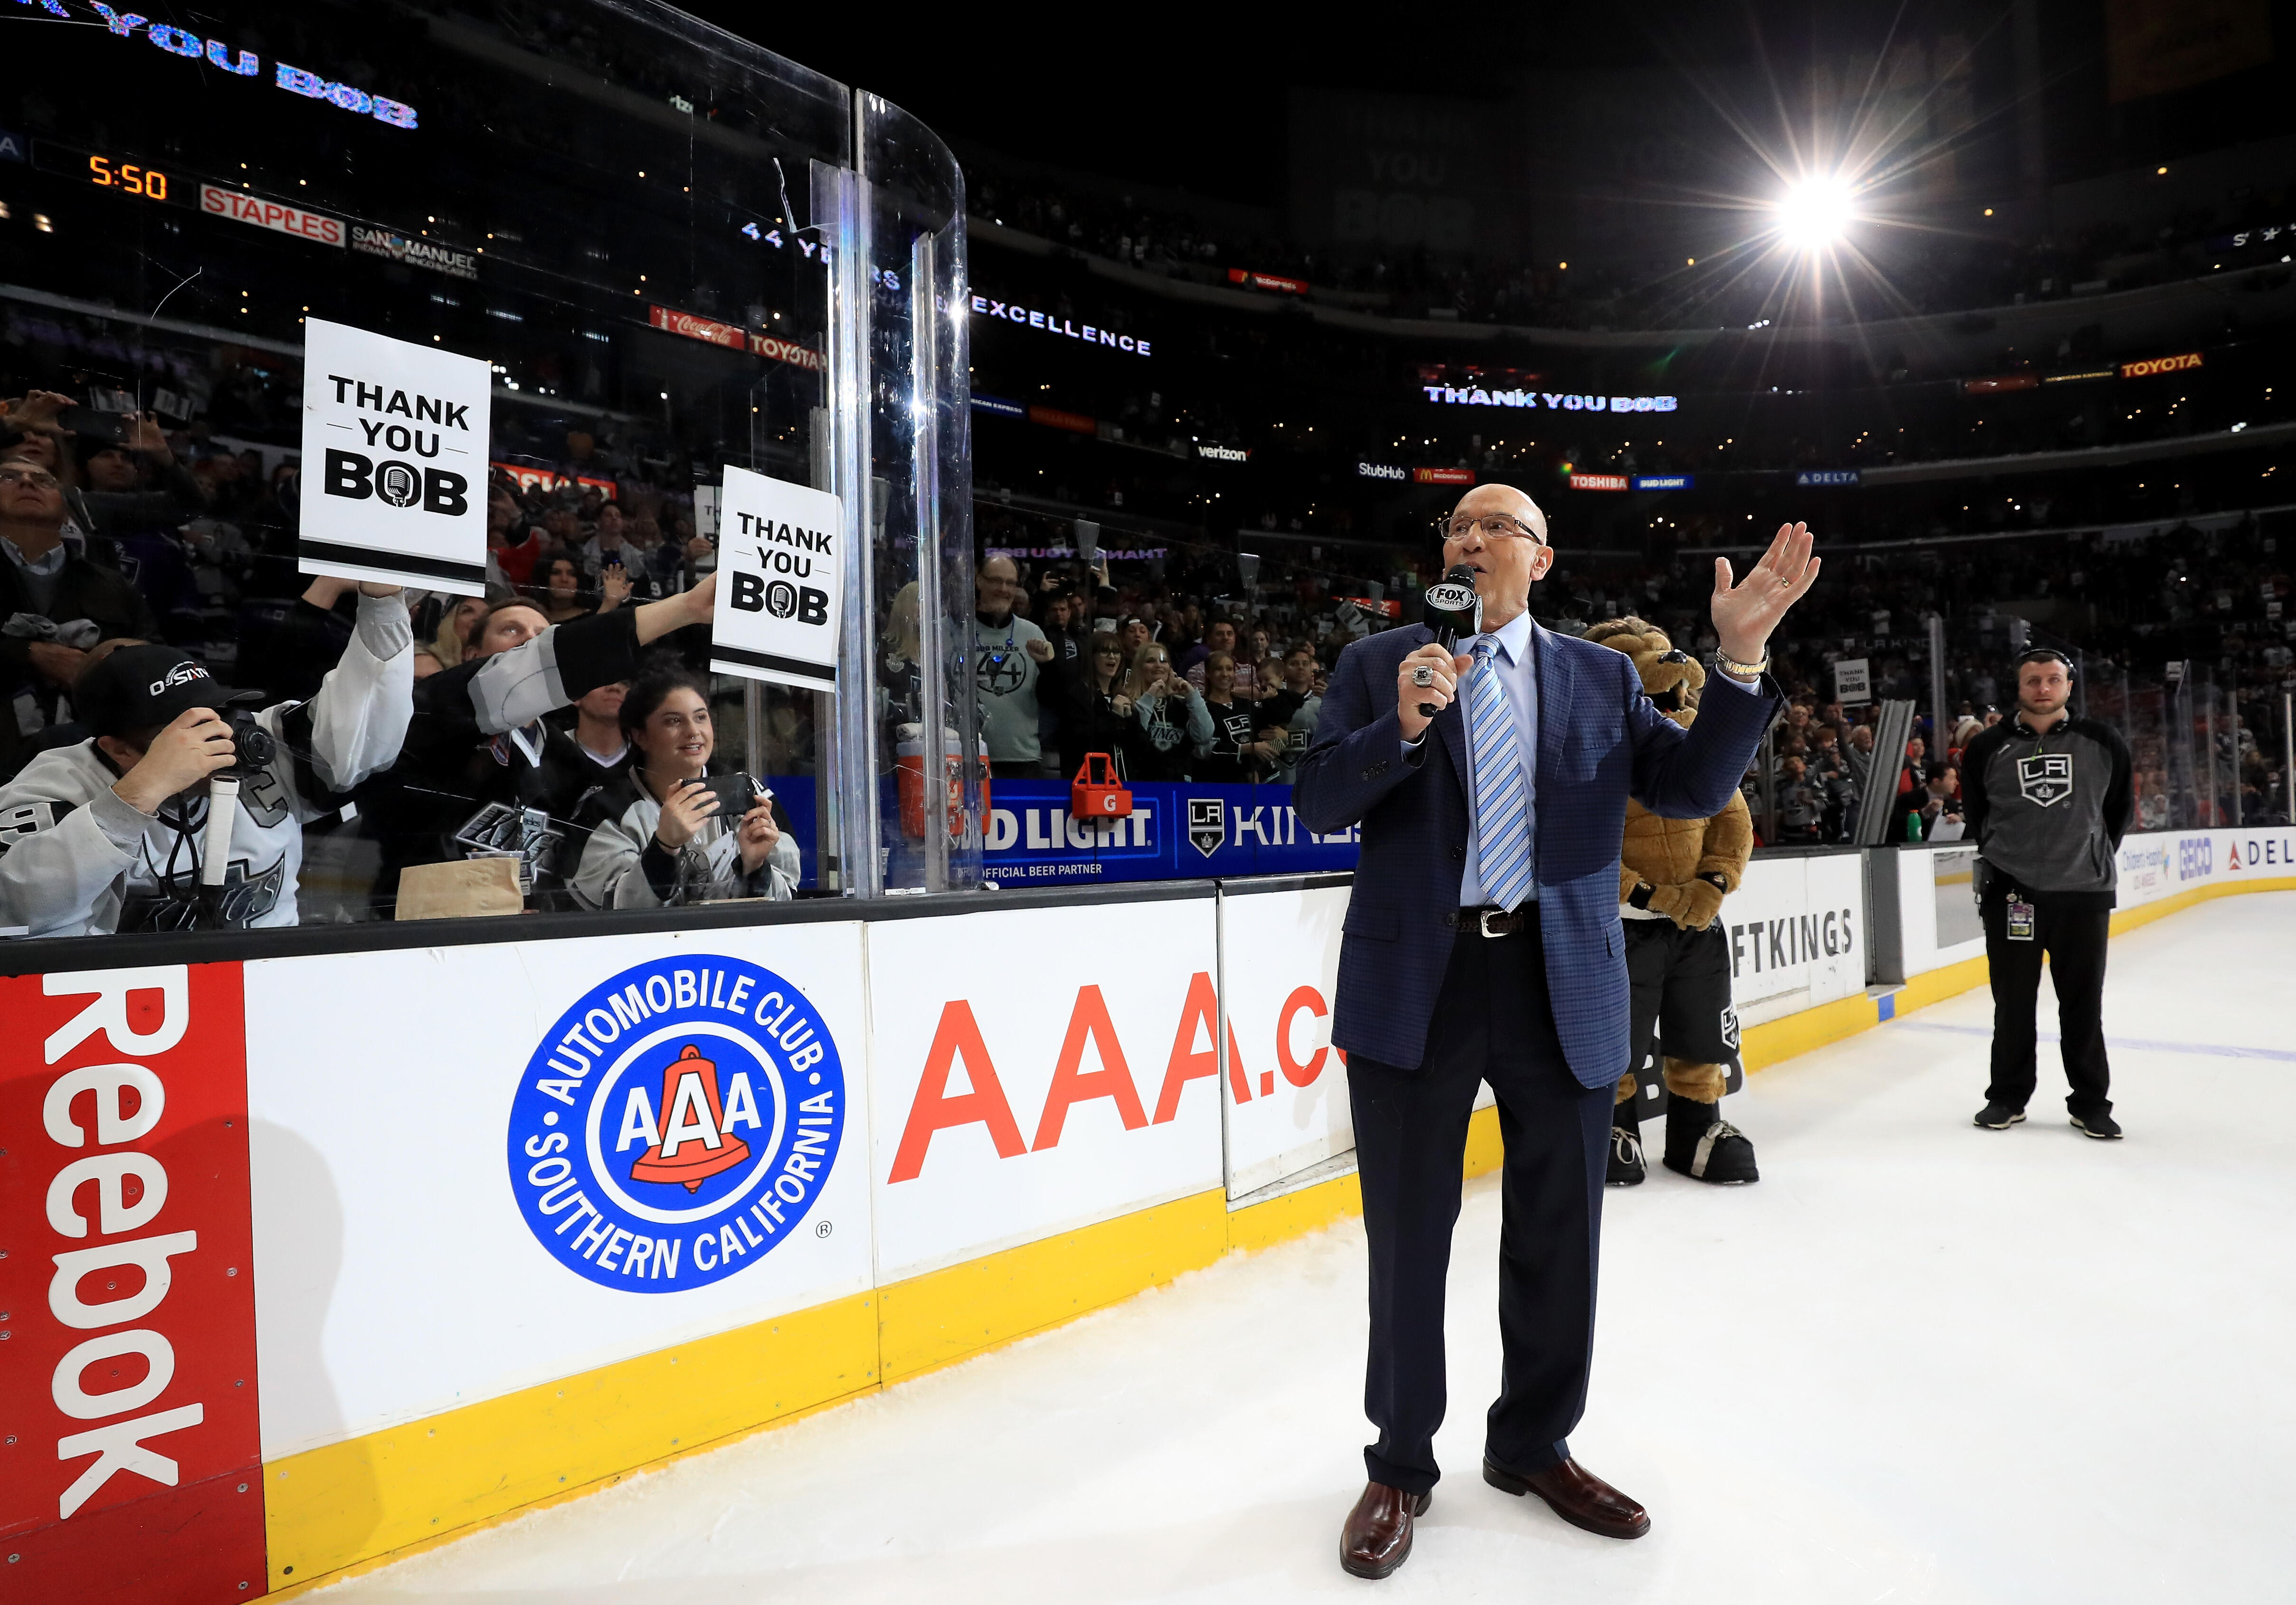 LOS ANGELES, CA - APRIL 08:  Los Angeles Kings broadcaster Bob Miller addresses the crowd after a game between the Los Angeles Kings and the Chicago Blackhawks at Staples Center on April 8, 2017 in Los Angeles, California.  (Photo by Sean M. Haffey/Getty 